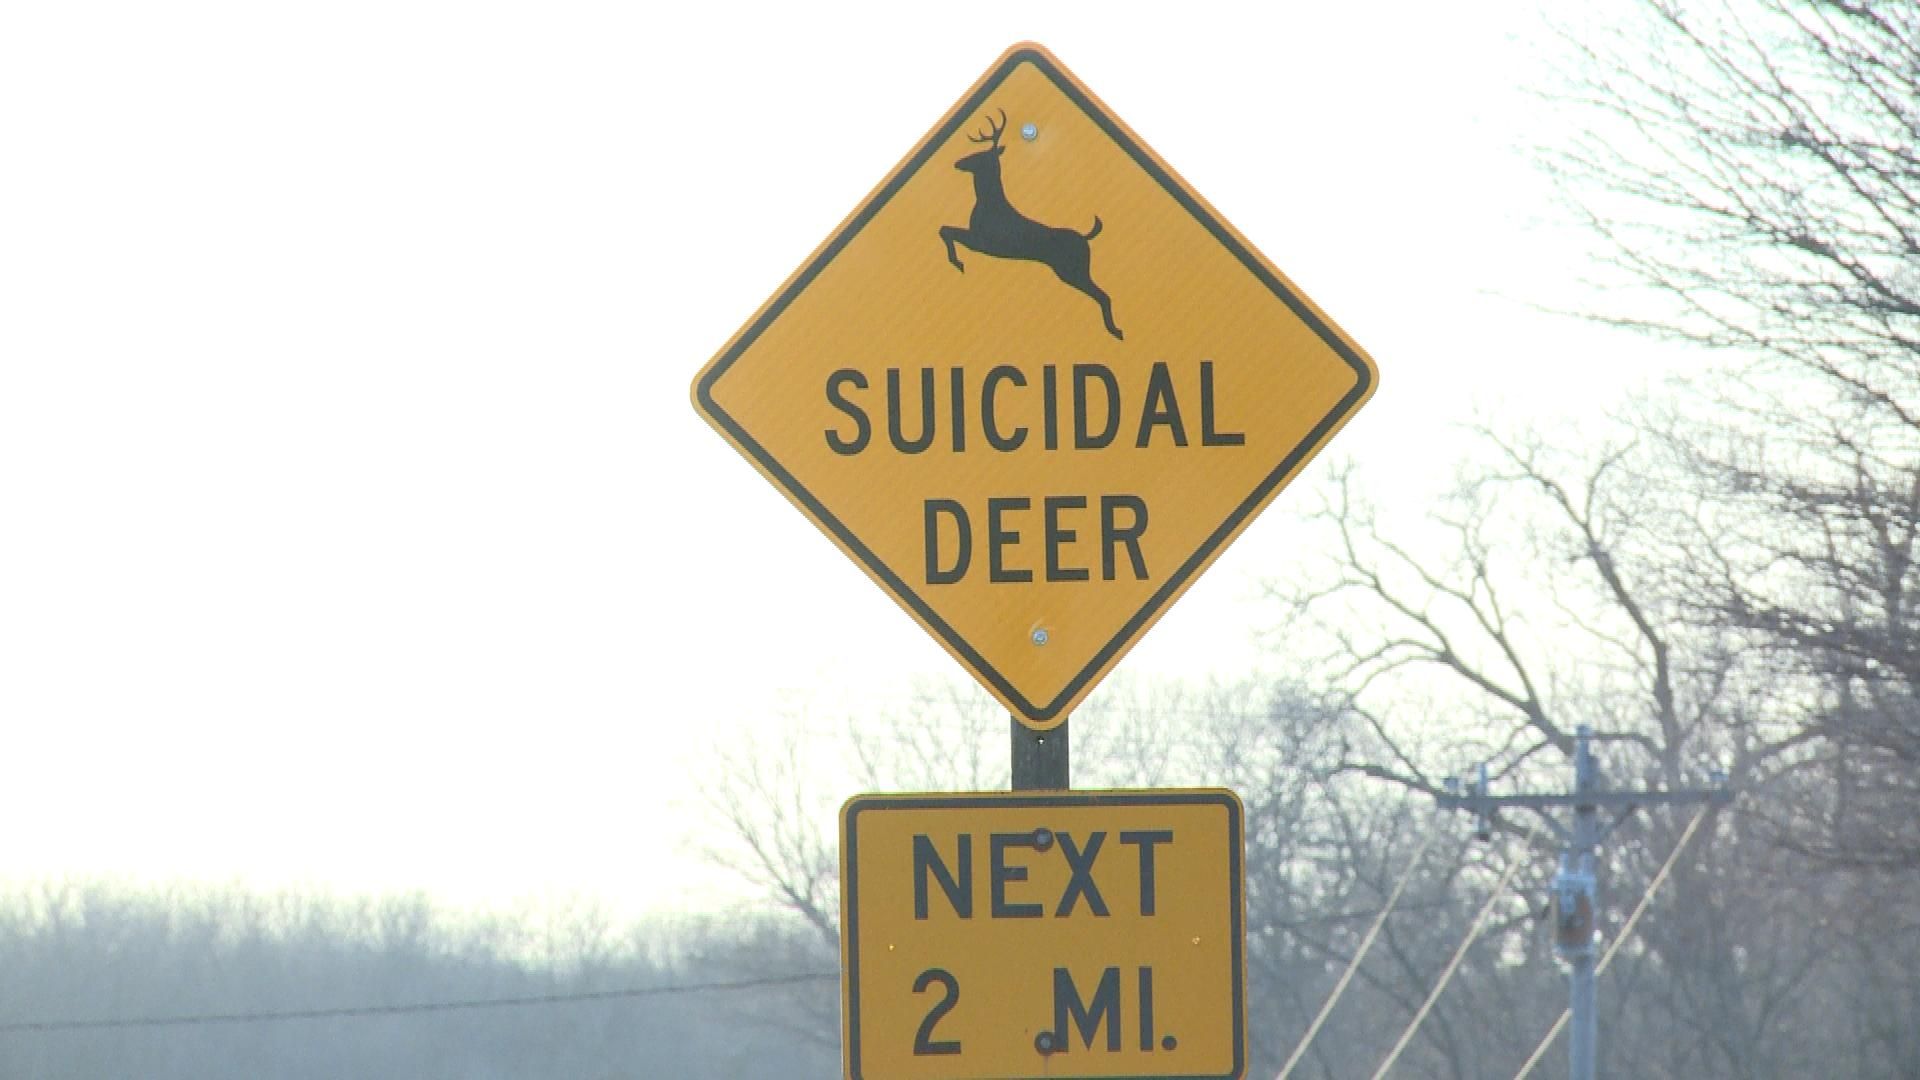 Oh deer! Be careful out there.